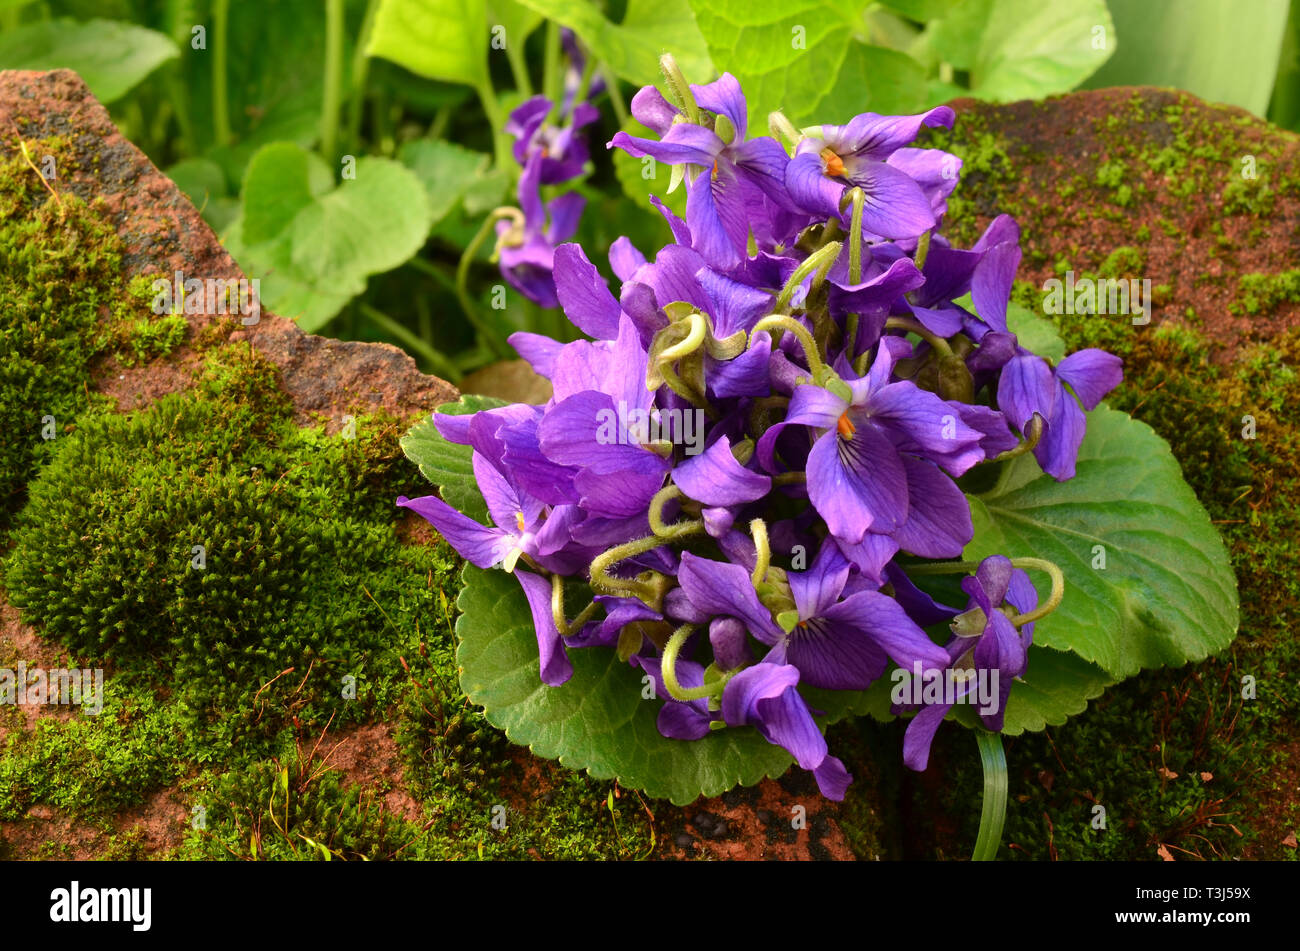 Bouquet of fresh, spring violets on red stone overgrown with moss, close up view Stock Photo